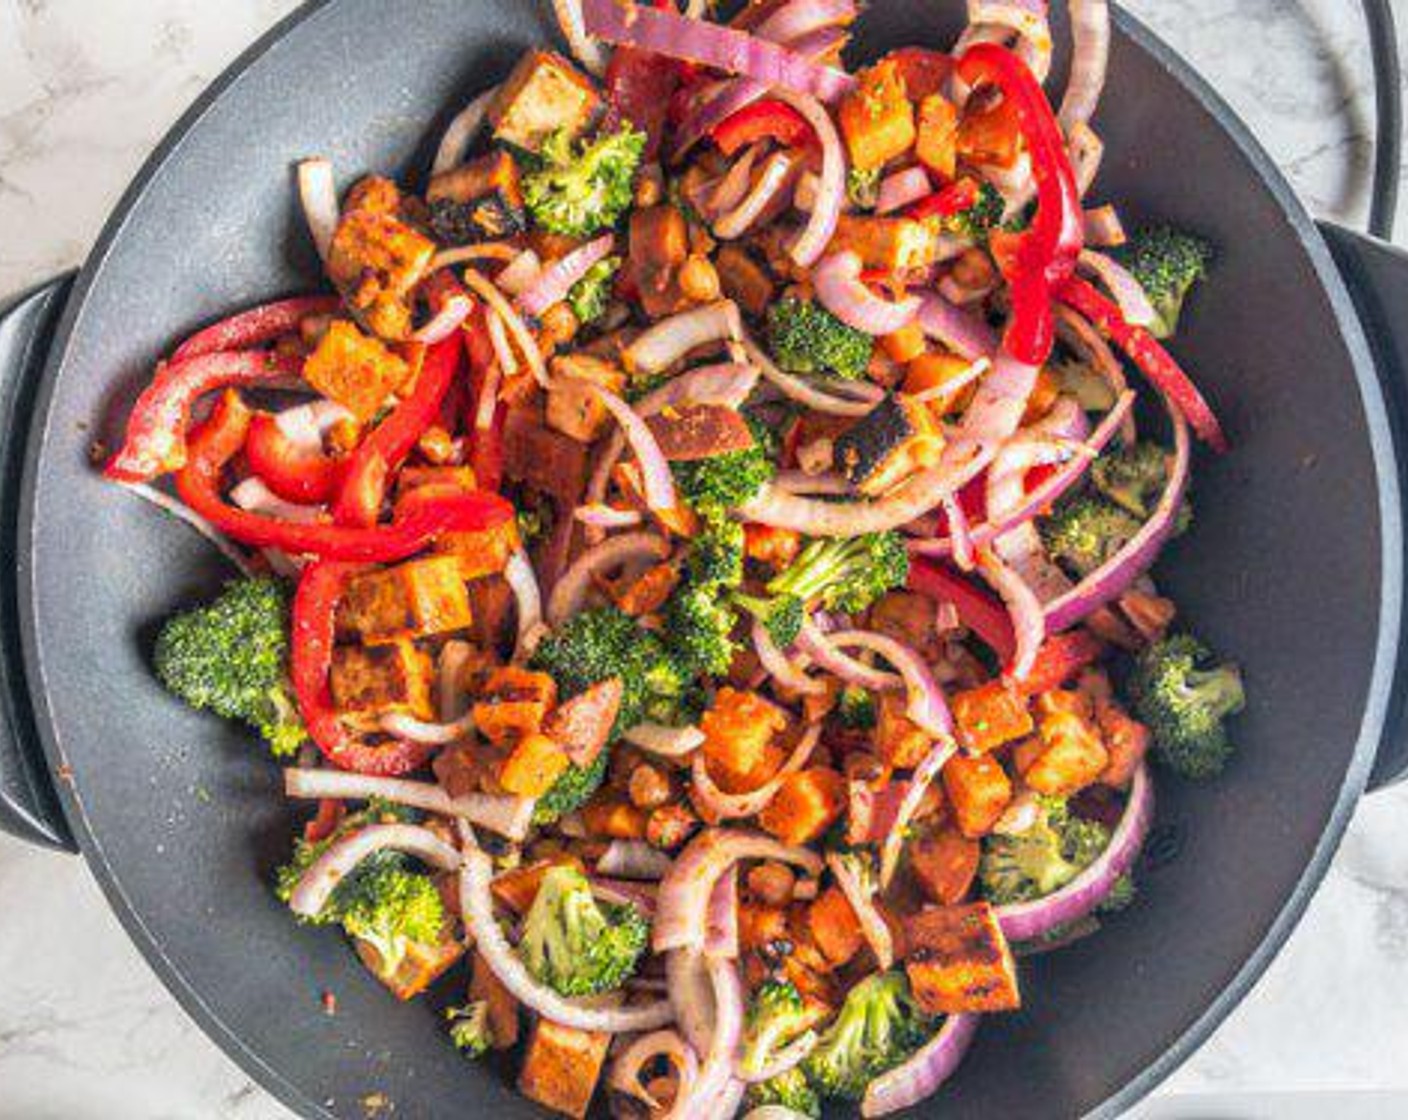 step 5 Add Broccoli (1 head), Red Onion (1), Bell Pepper (1), Oil (1 Tbsp), and Greek Seasoning (1 tsp). Mix together and cook 1 minute while covered.